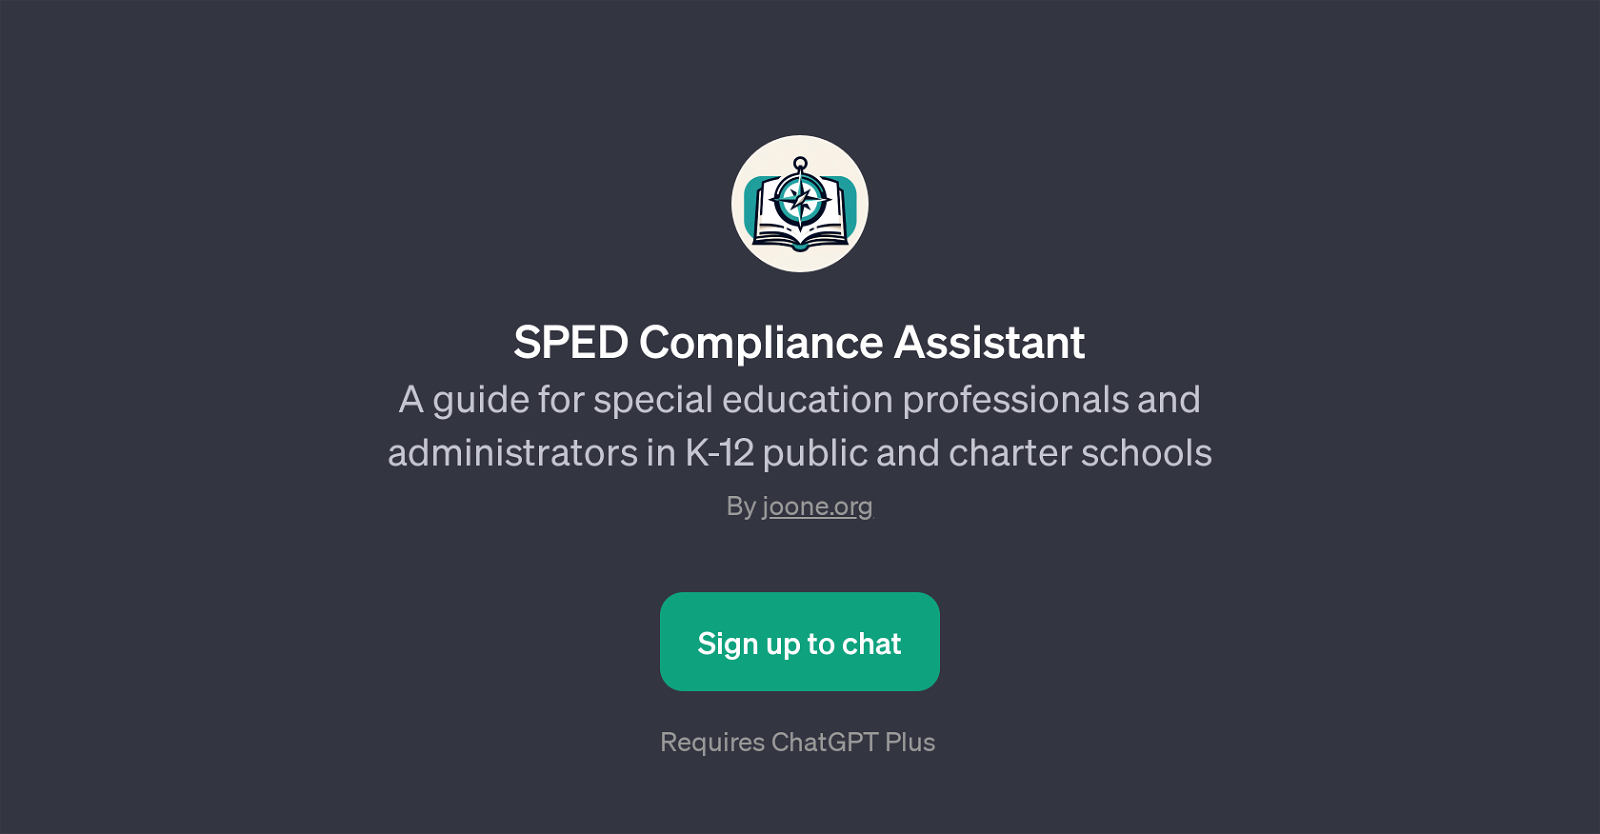 SPED Compliance Assistant website